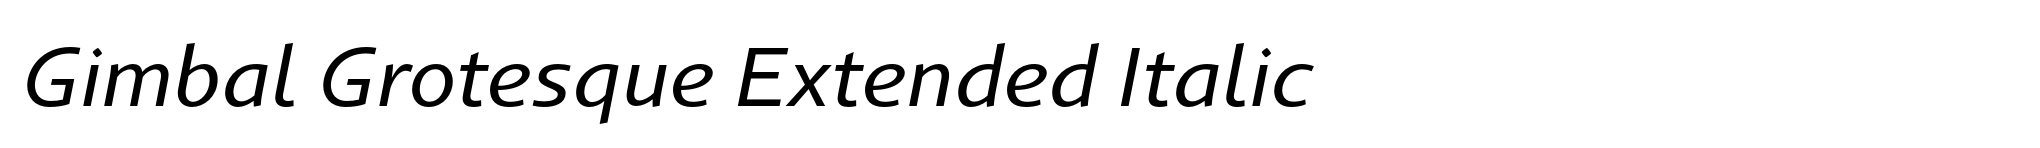 Gimbal Grotesque Extended Italic image